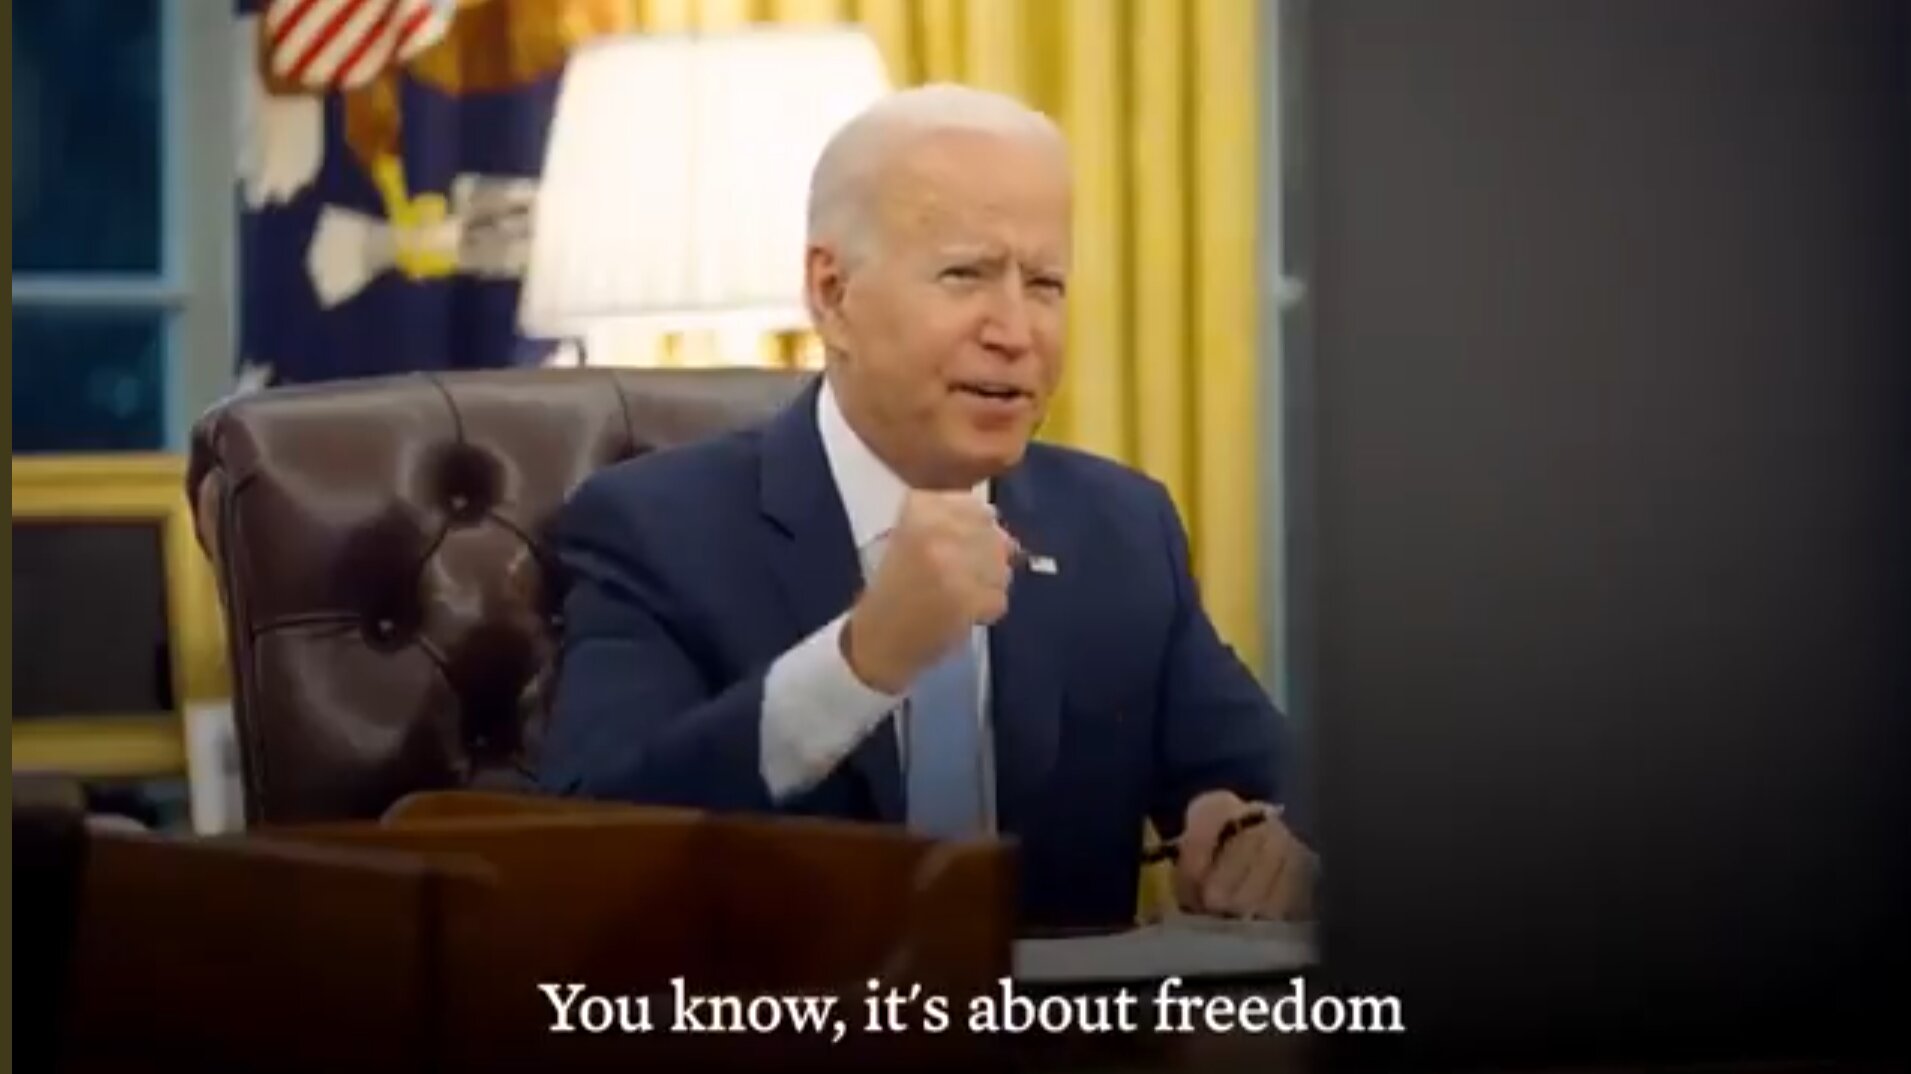  New: Biden Goes Nuclear on Republican Governors Over Healthcare, Singles Out Florida and Texas Govs in Savage Tweet After Slashing Delivery of Lifesaving Covid Treatment to Their States